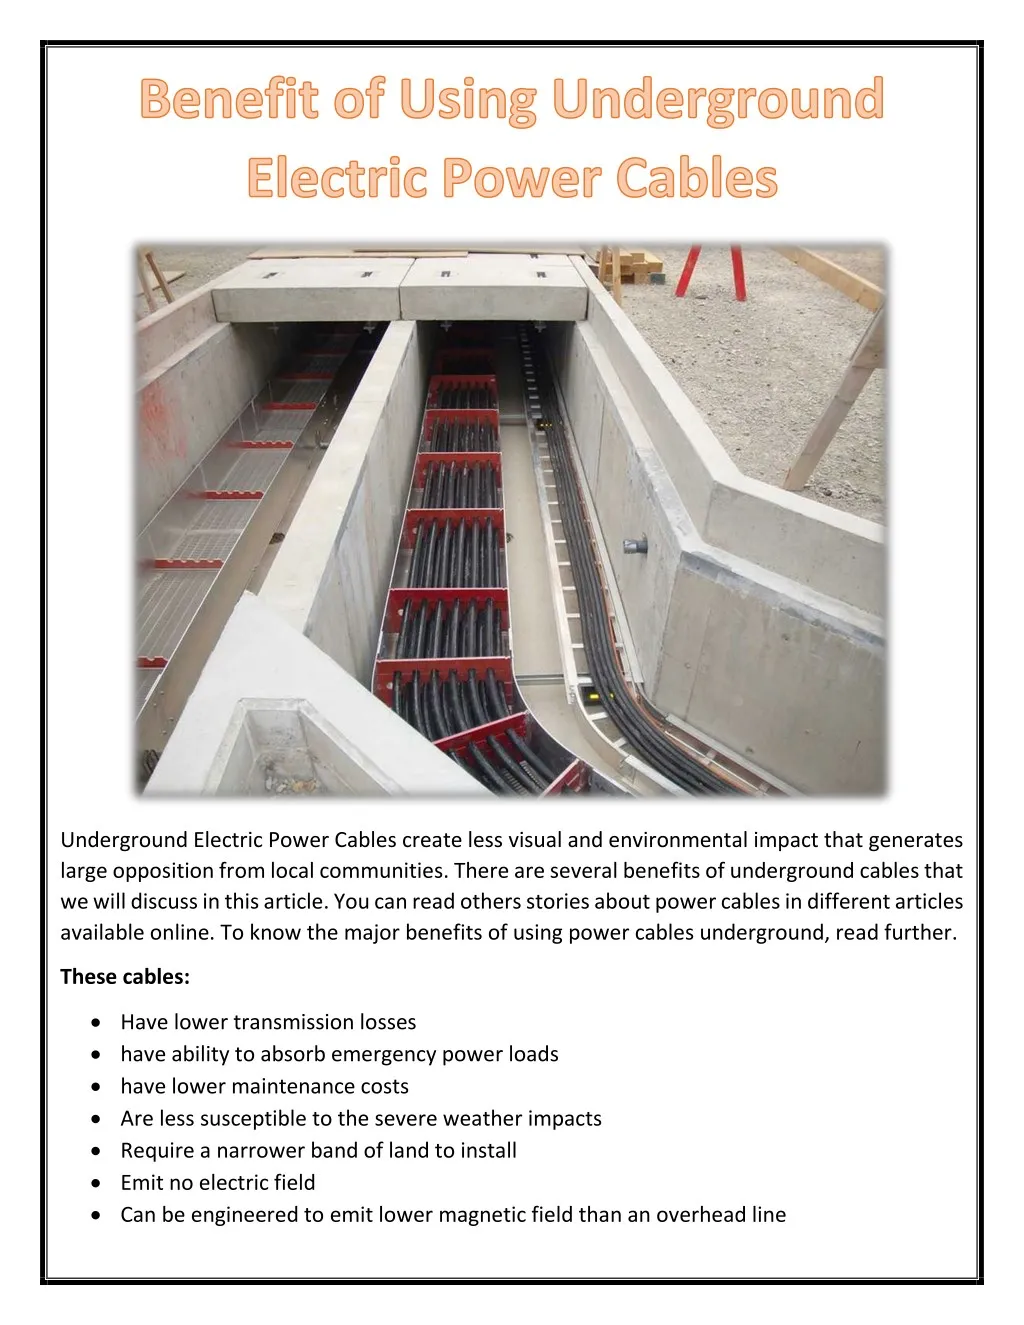 underground electric power cables create less